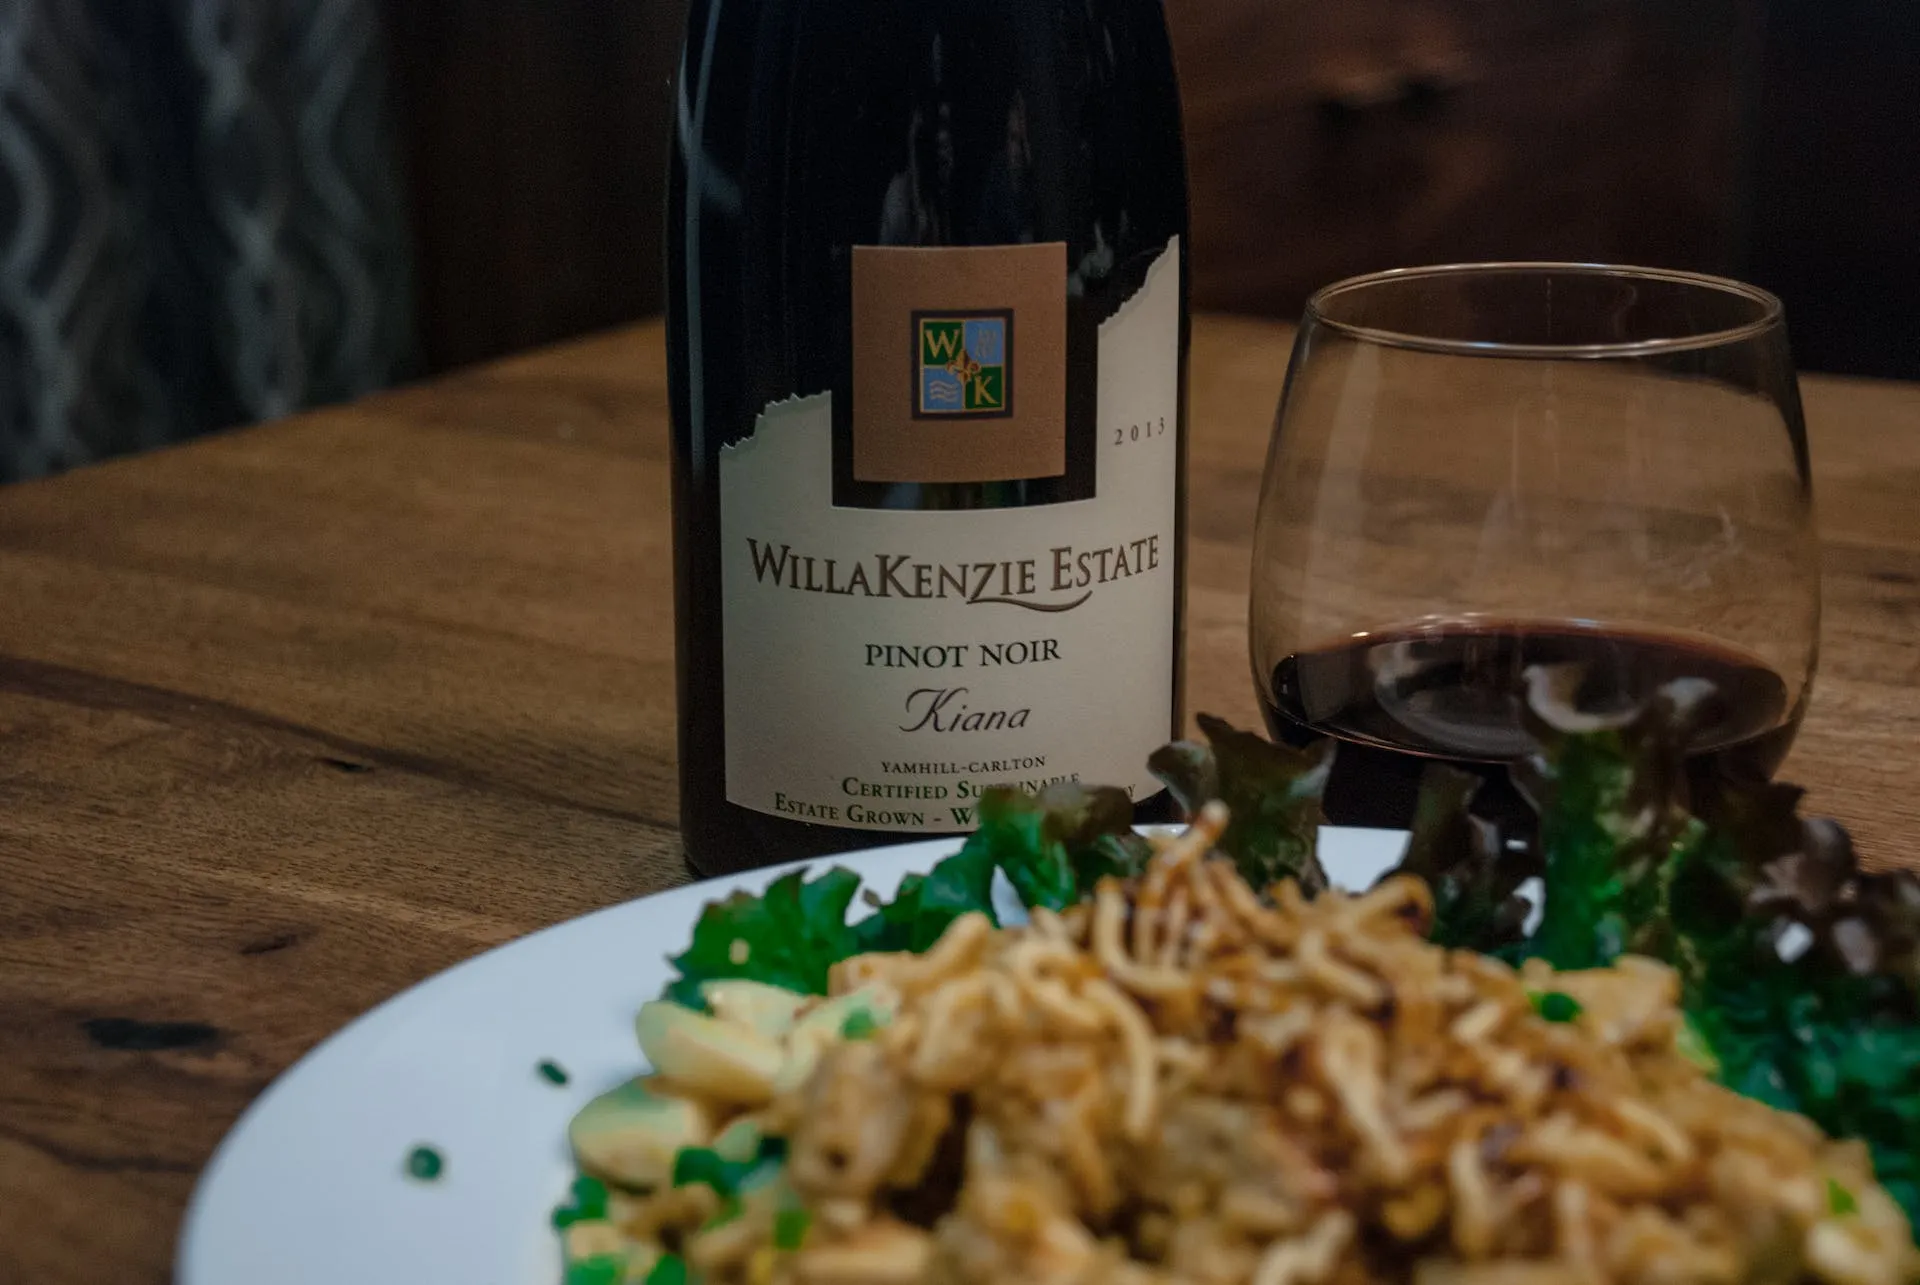 You are invited to dinner and don't know what wine to bring? We suggest it to you!